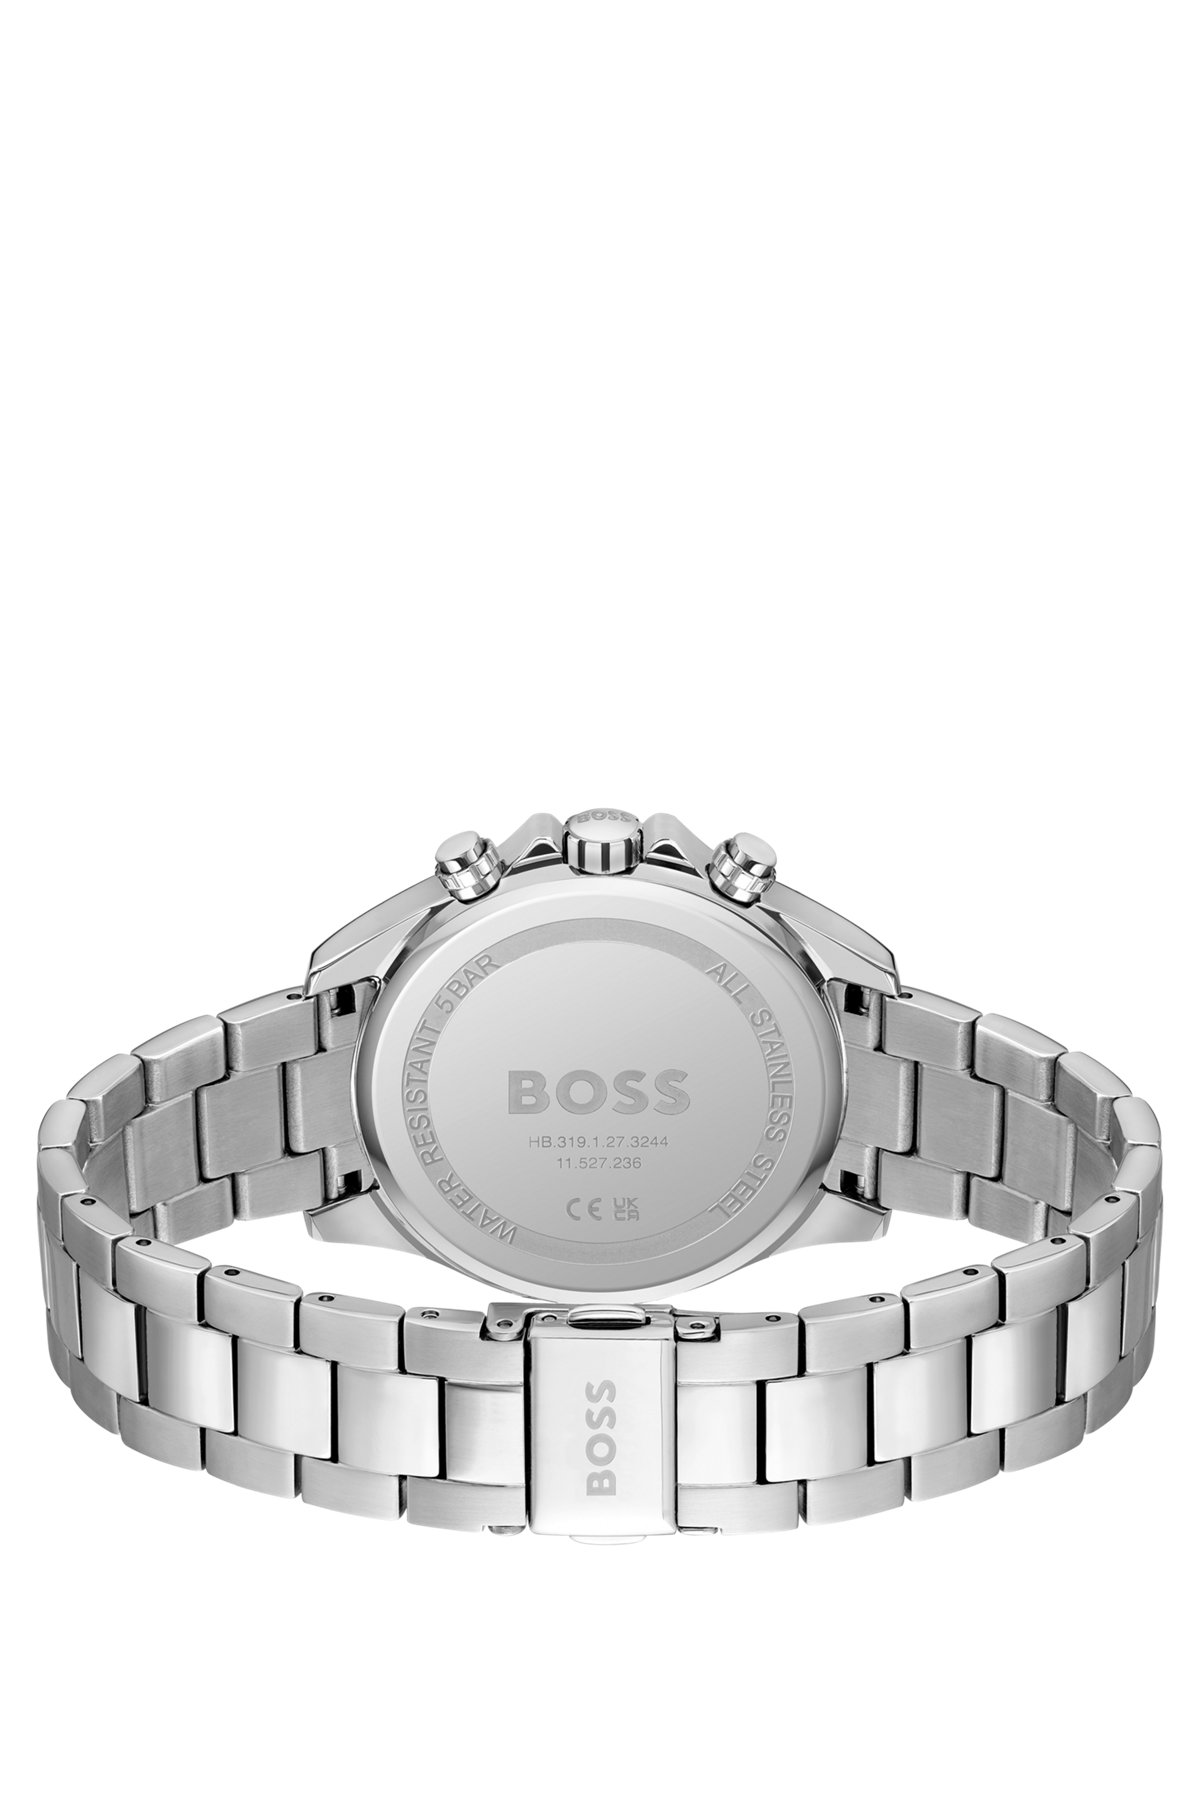 BOSS - Link-bracelet multi-functional watch with pink dial